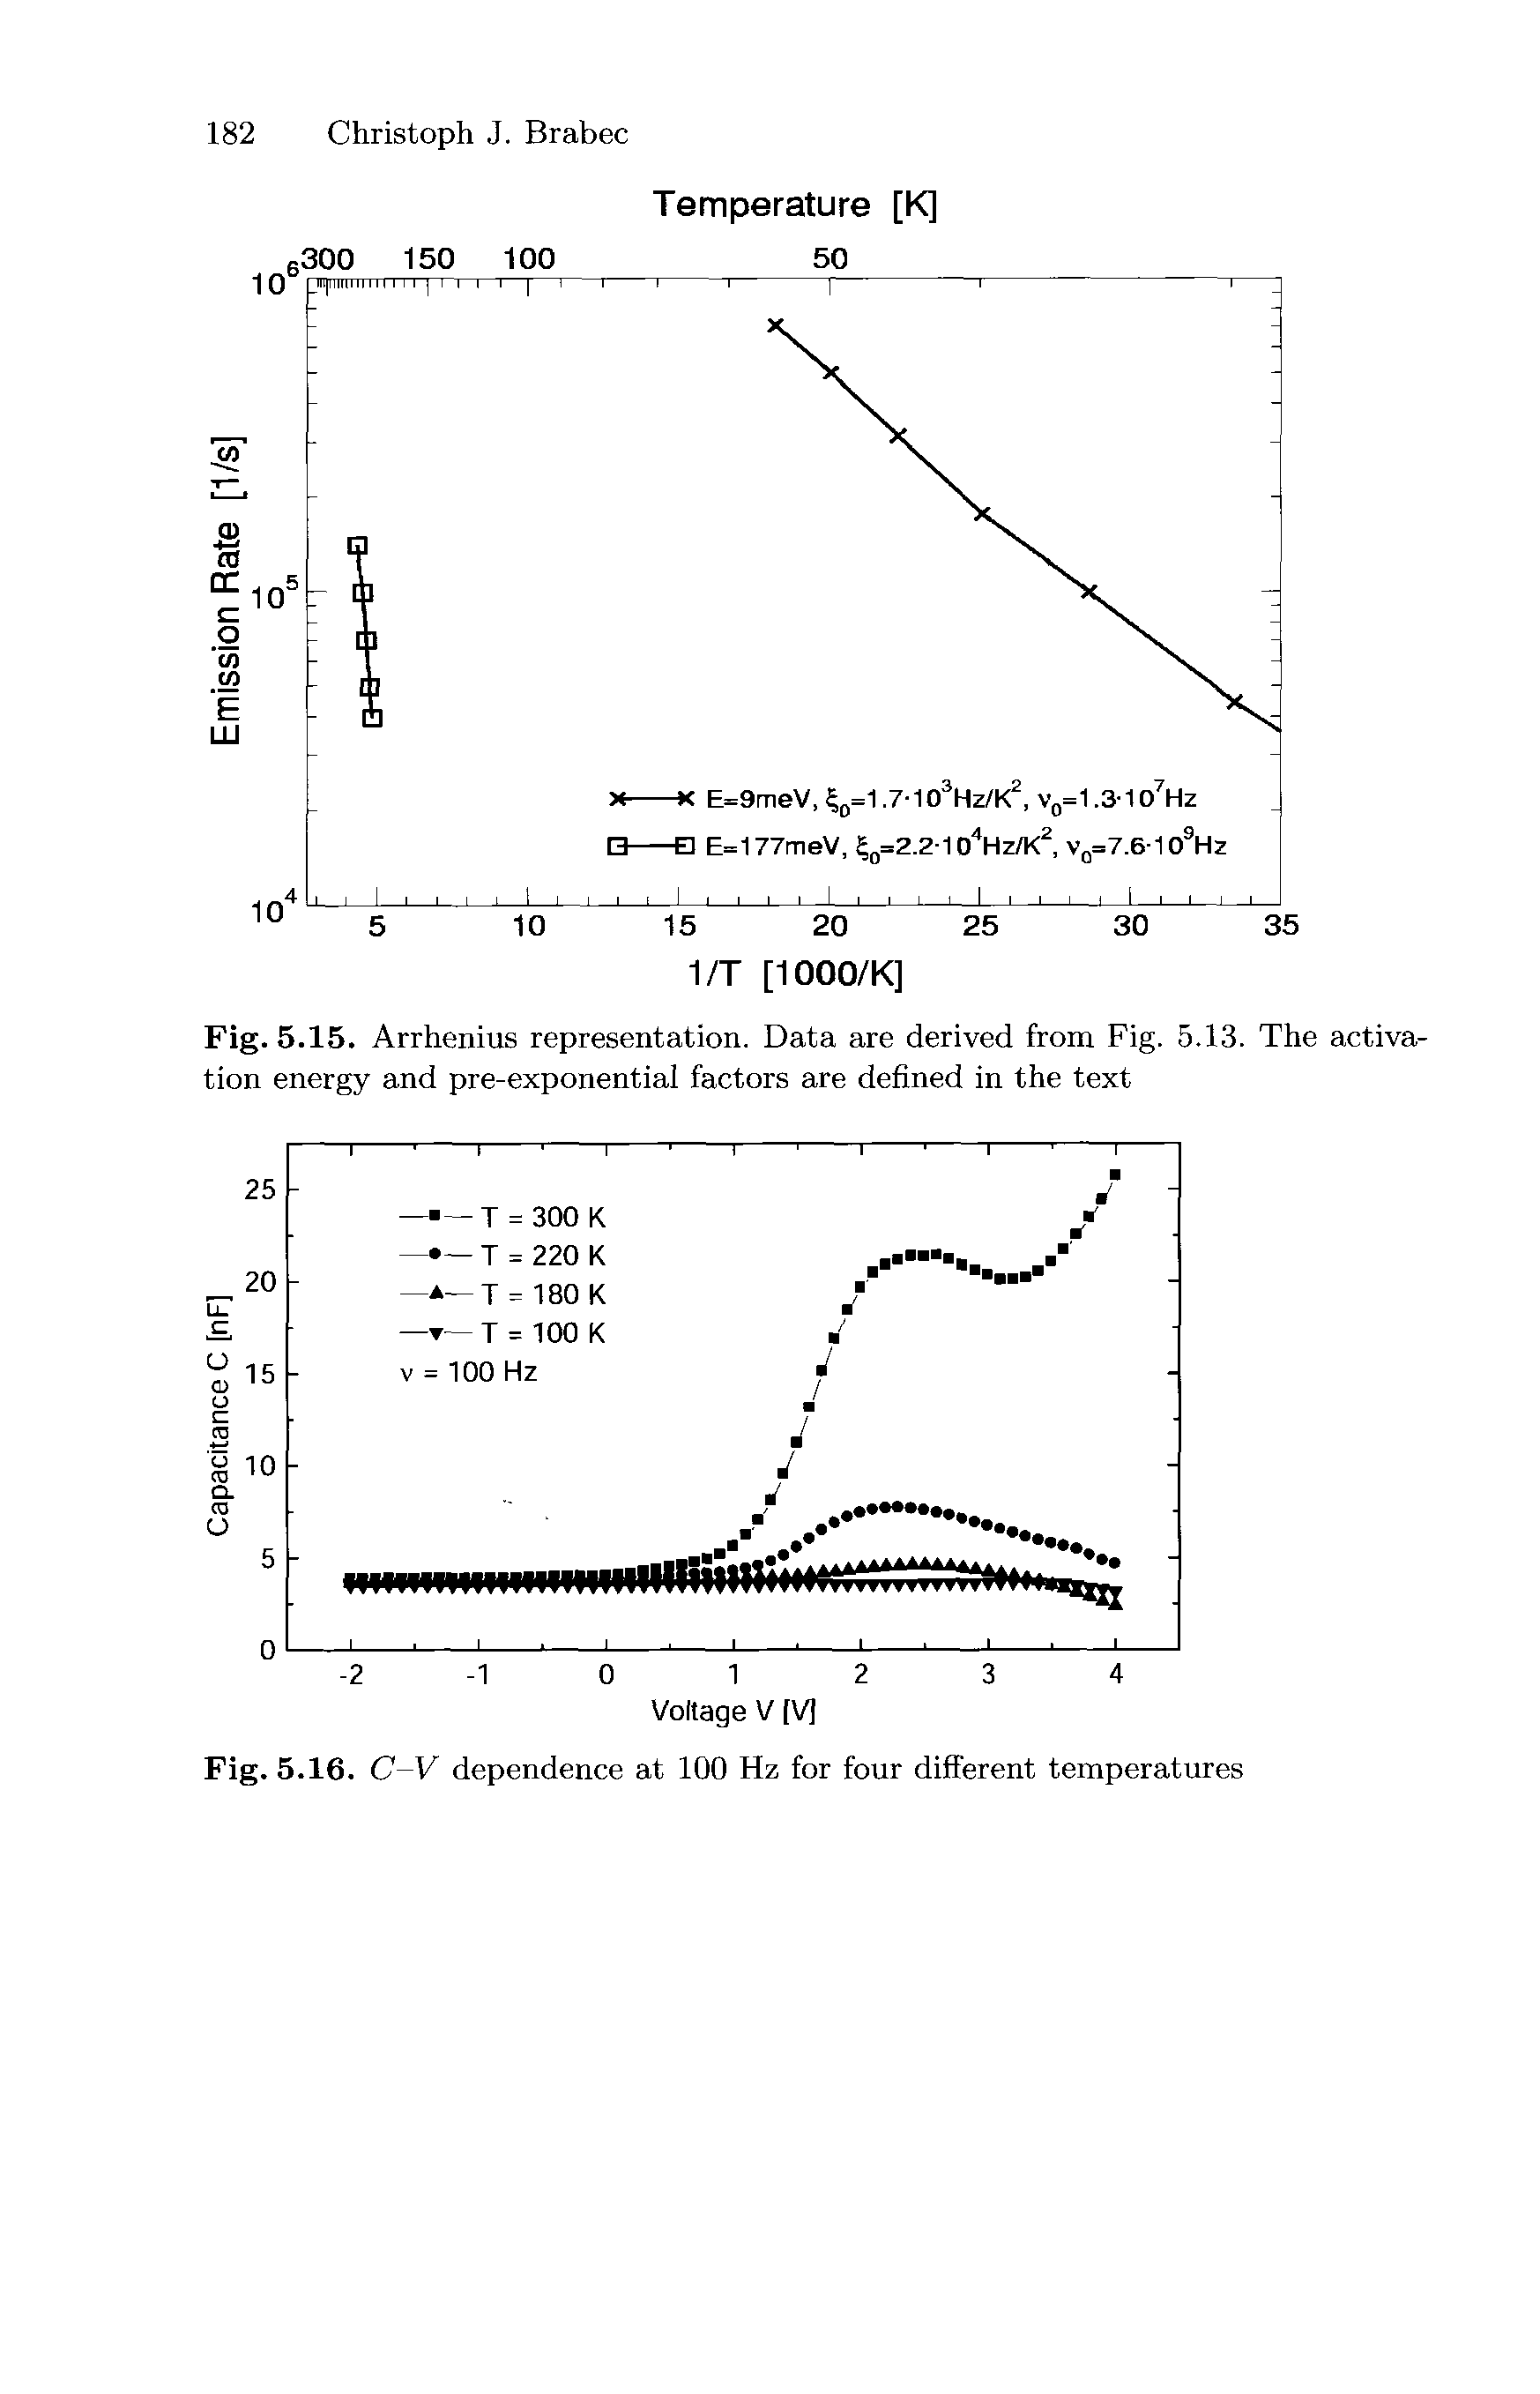 Fig. 5.15. Arrhenius representation. Data are derived from Fig. 5.13. The activation energy and pre-exponential factors are defined in the text...